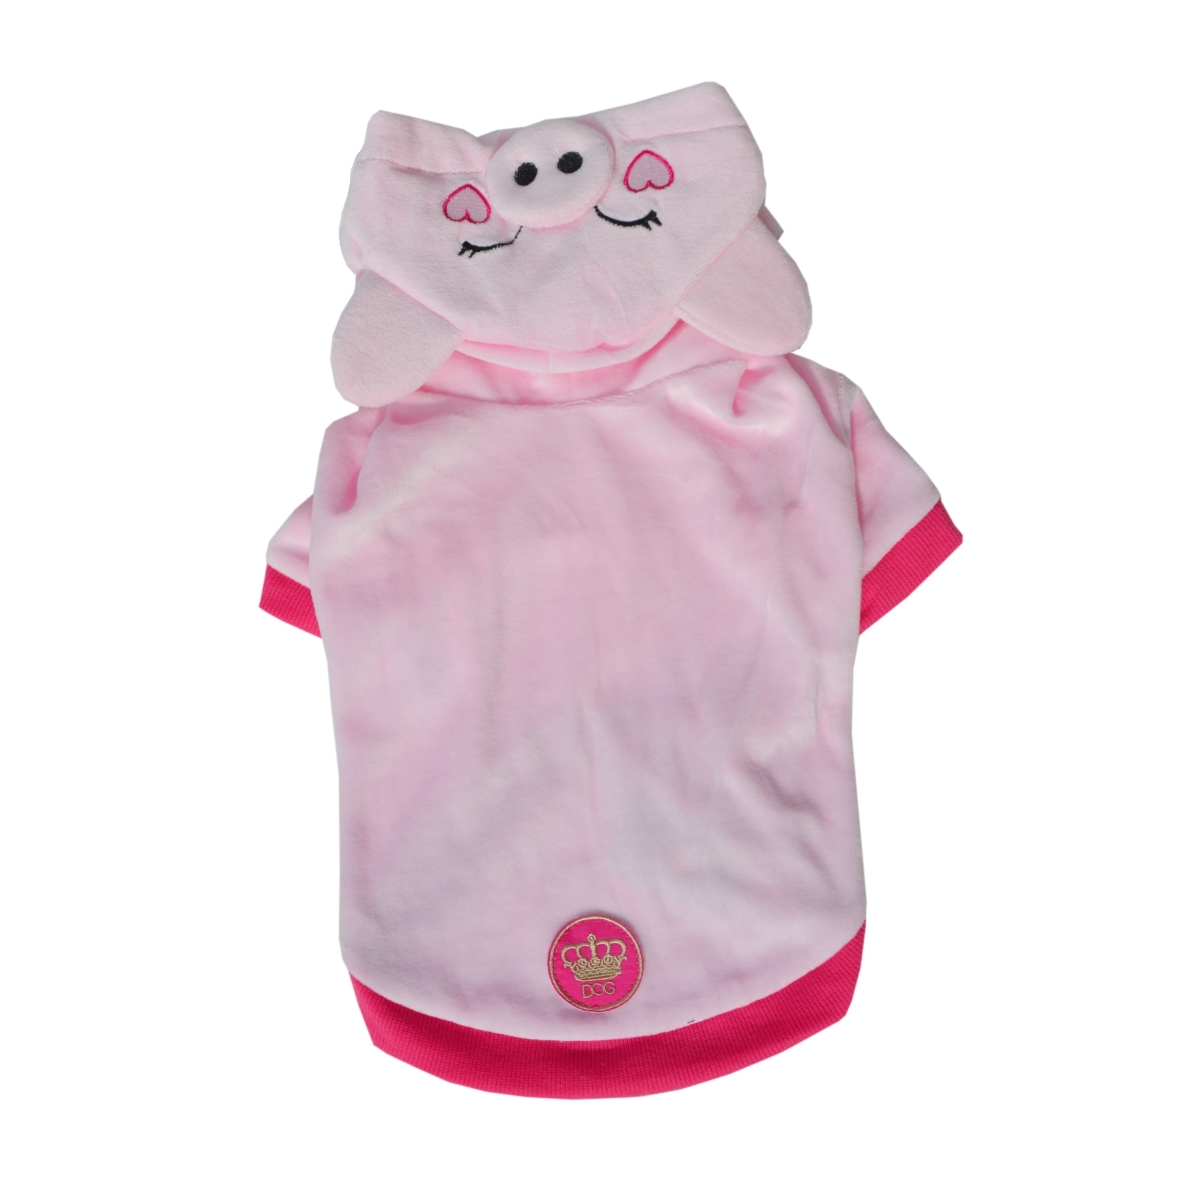 Fw355-s Pig Hoodie, Pink - Small